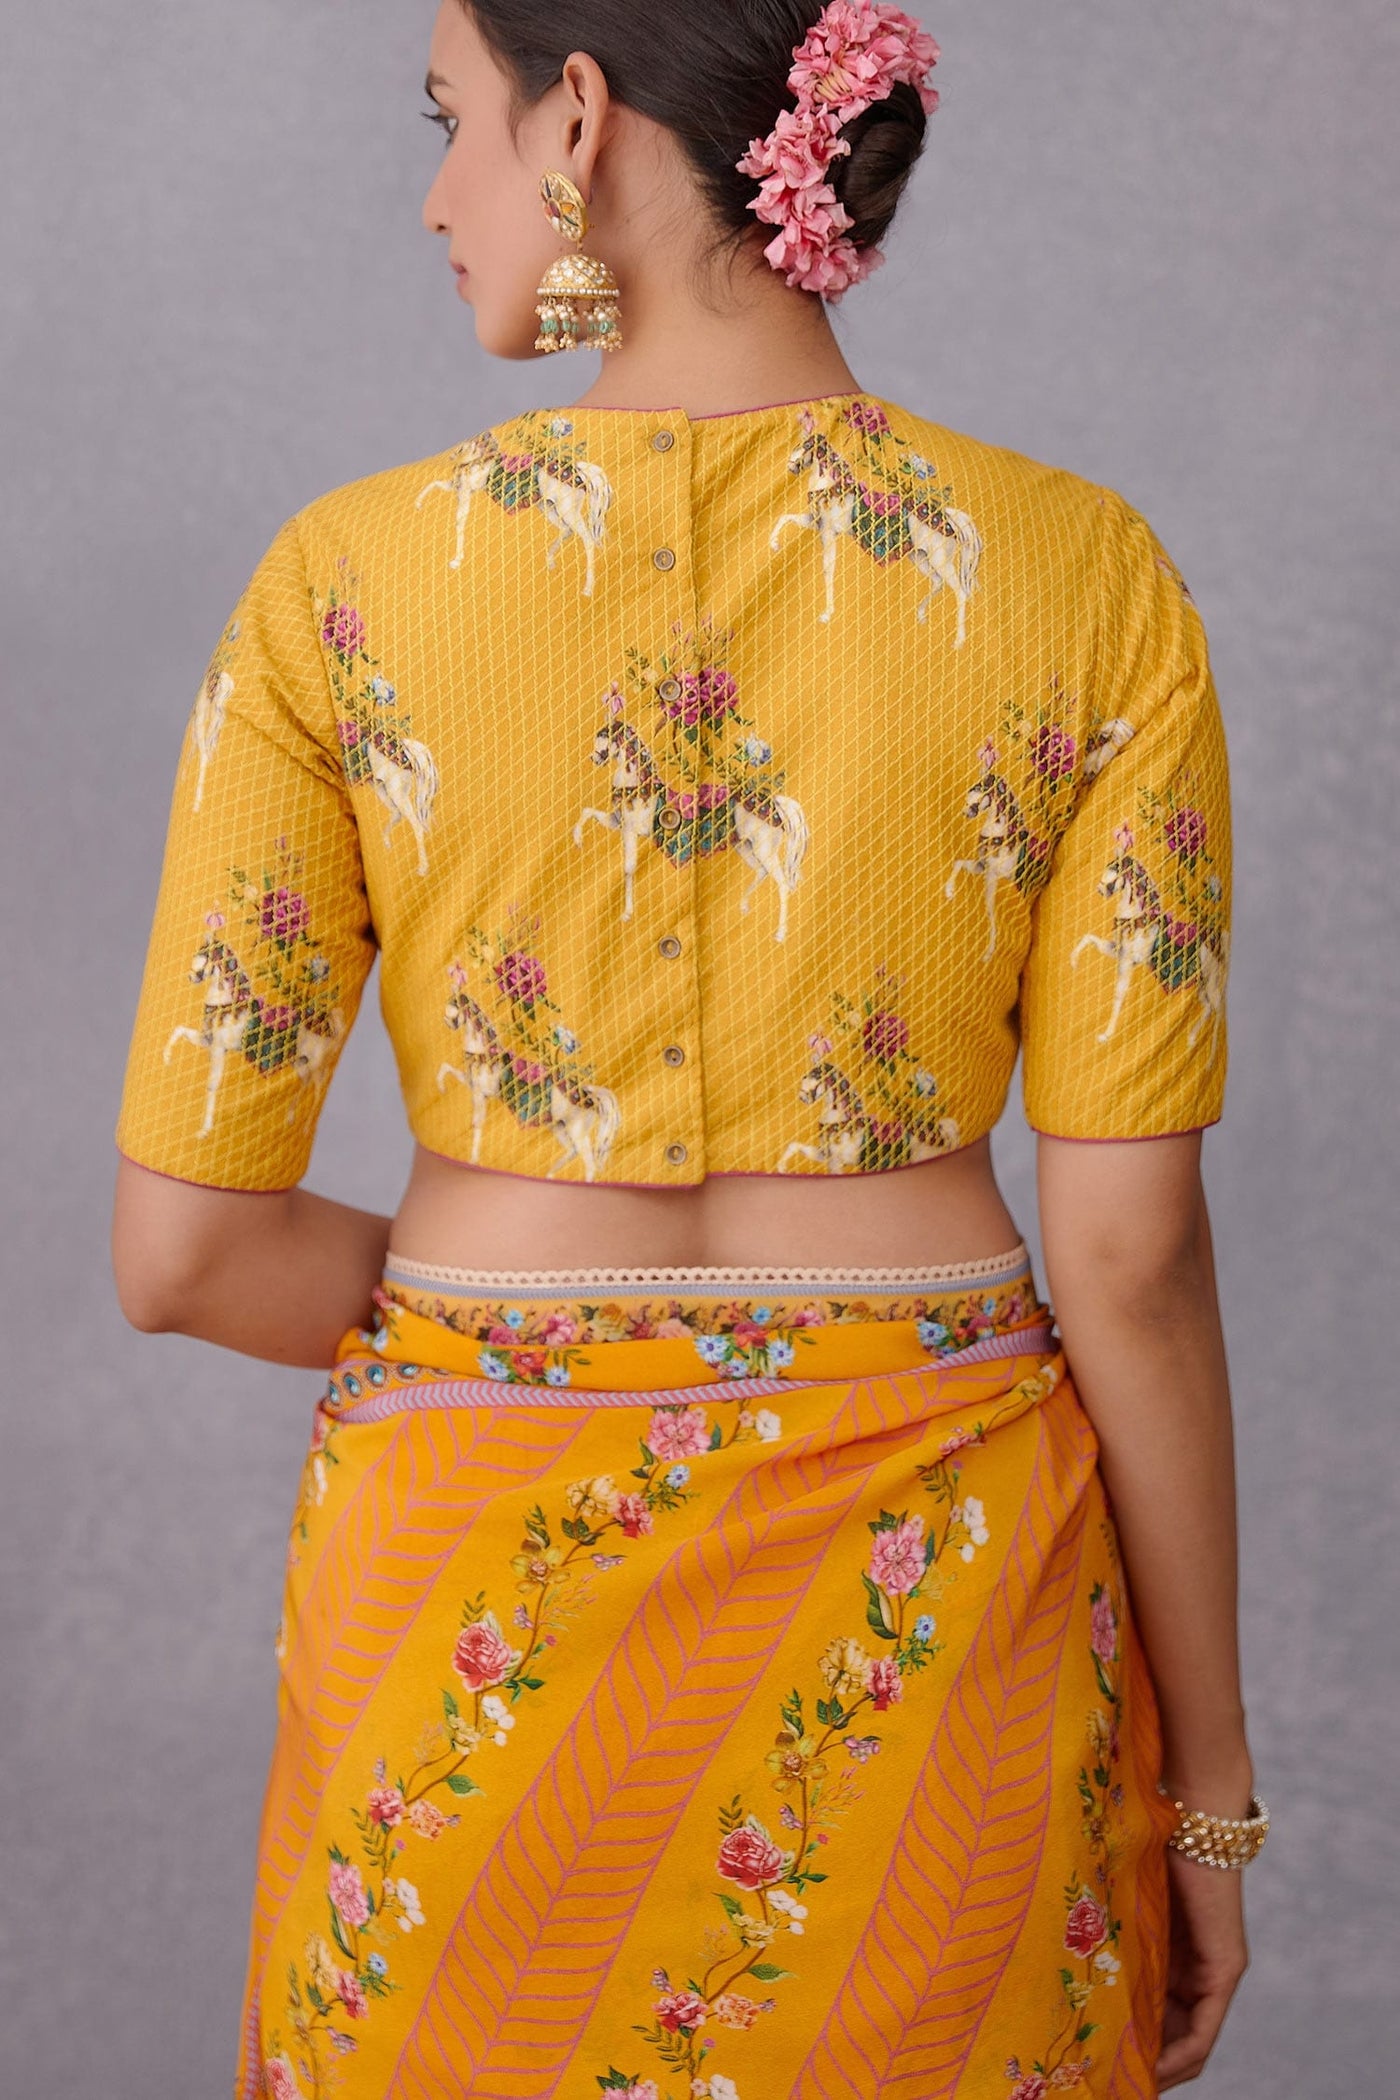 Sunehra Aashvani Blouse - Indian Clothing in Denver, CO, Aurora, CO, Boulder, CO, Fort Collins, CO, Colorado Springs, CO, Parker, CO, Highlands Ranch, CO, Cherry Creek, CO, Centennial, CO, and Longmont, CO. Nationwide shipping USA - India Fashion X